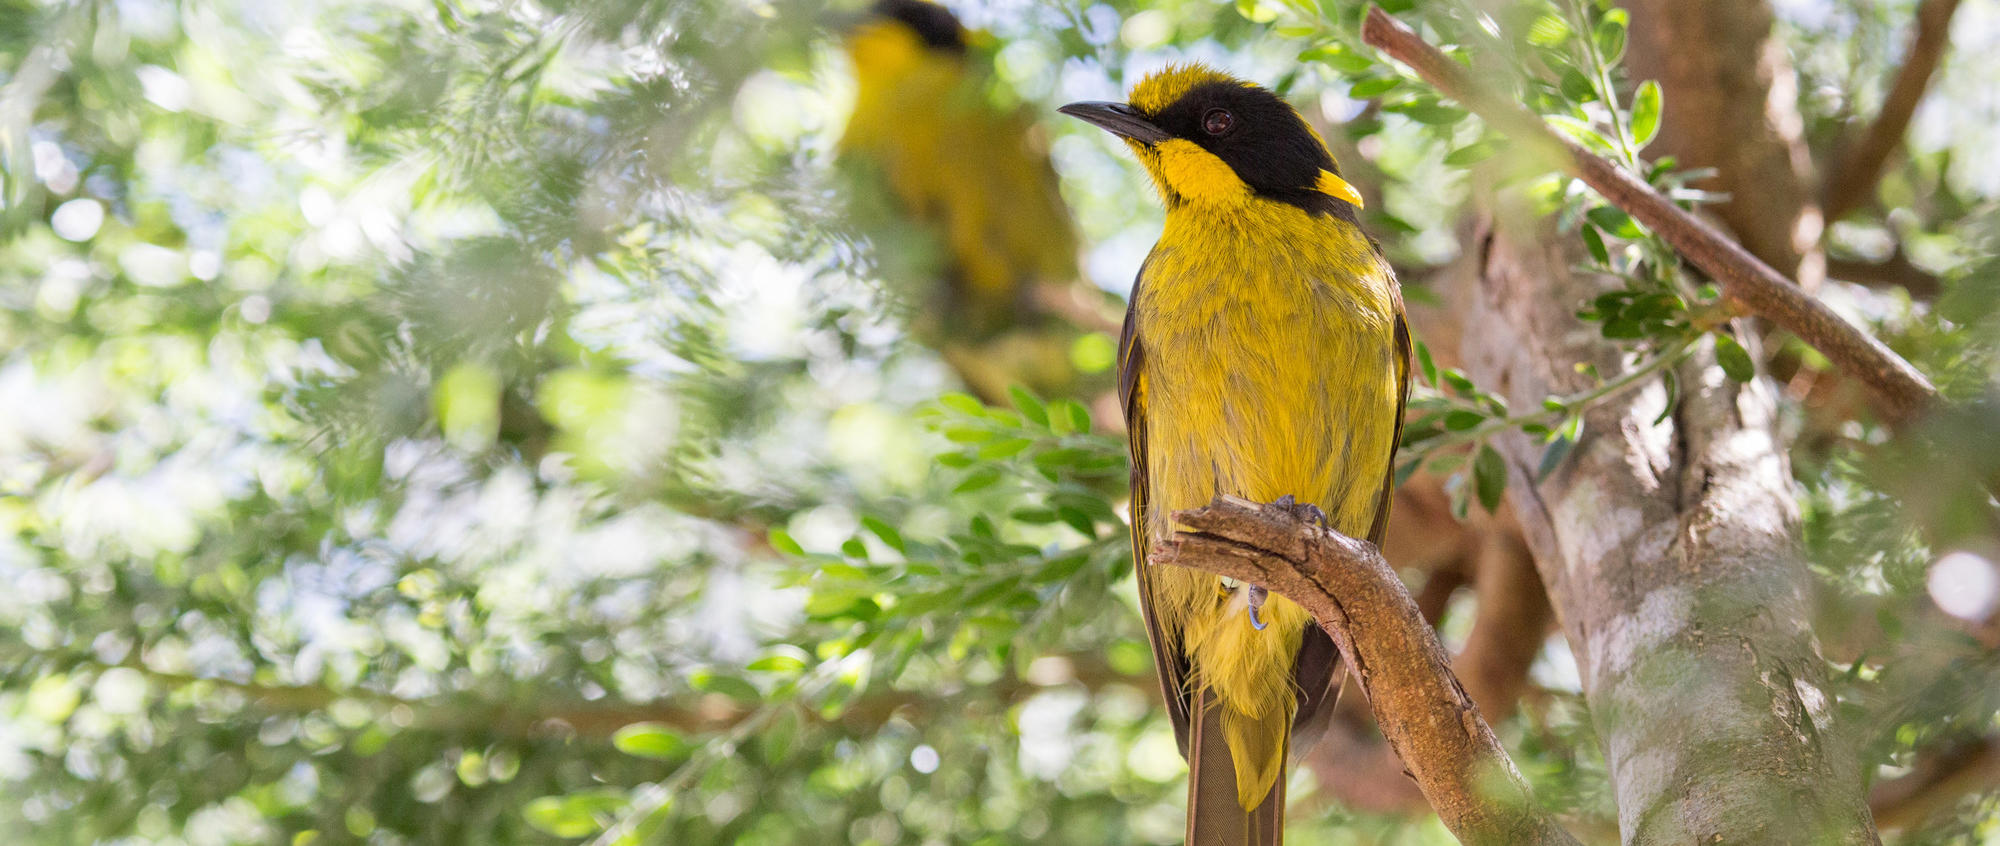 Yellow and black Helmeted Honeyeaters sits on a tree branch as another can be seen slightly out of focus in the background